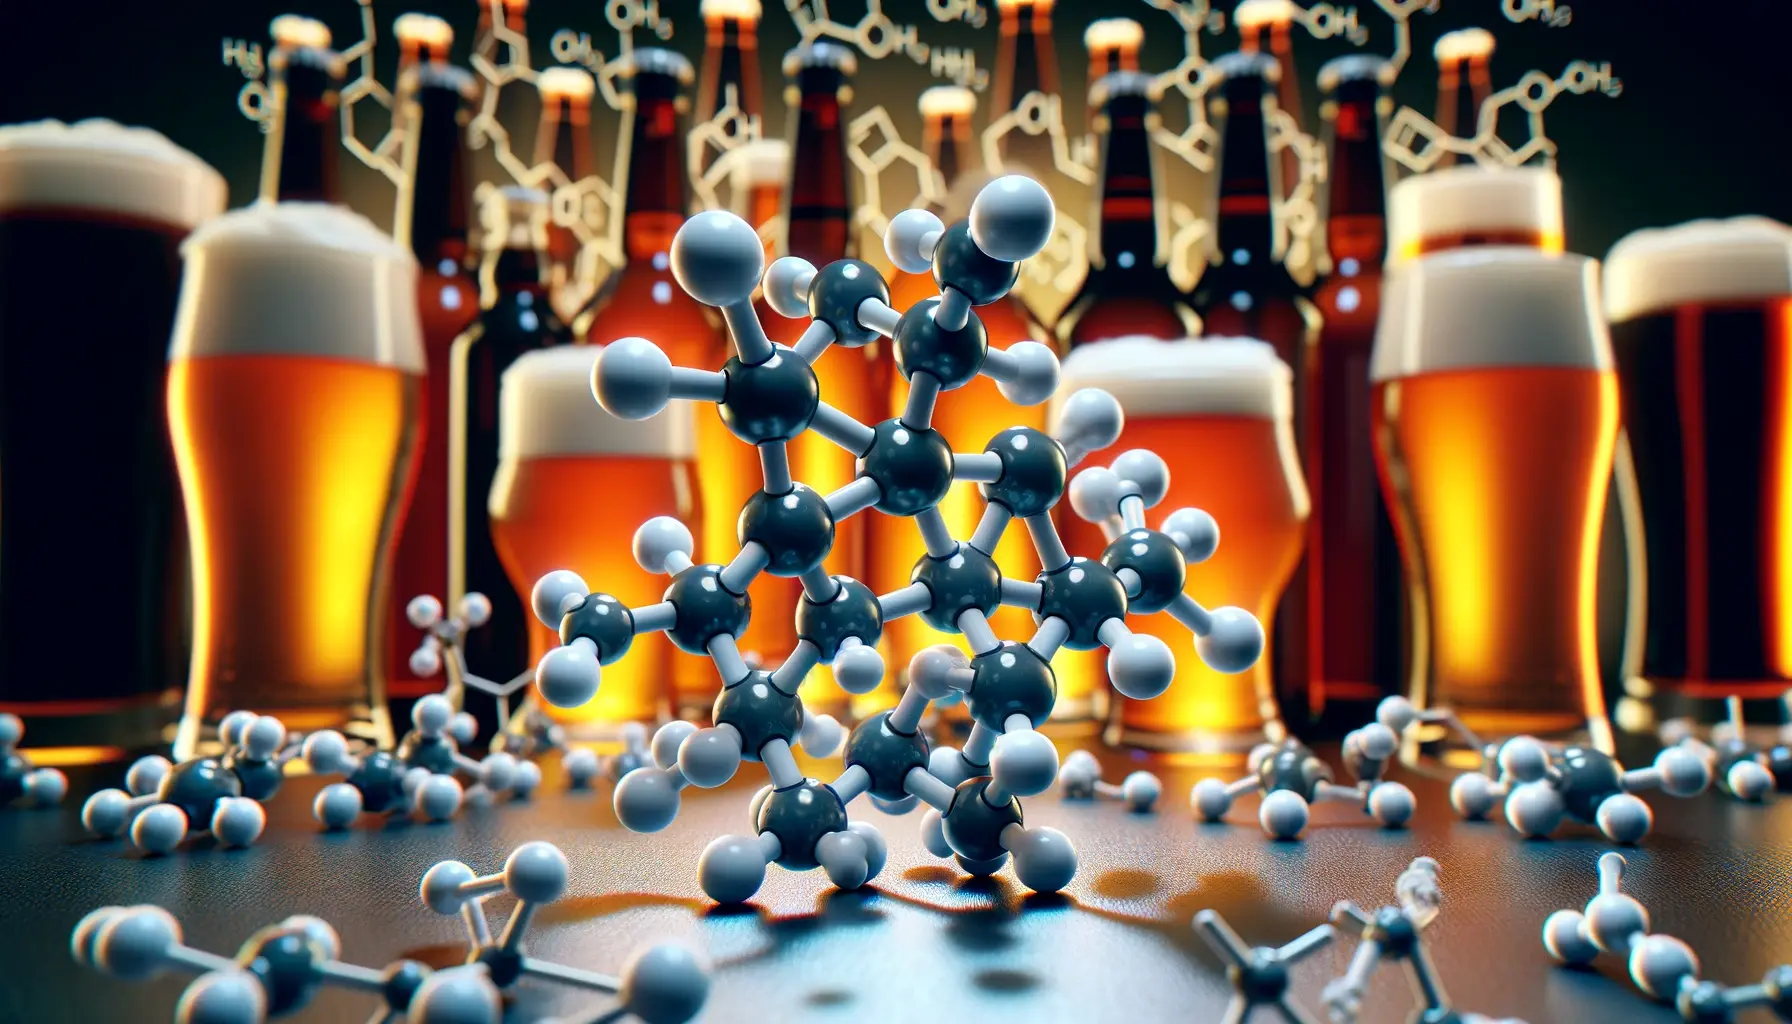 Artistic molecular structure of diacetyl against a backdrop of beer. The image shows a clear, detailed representation of the diacetyl molecule, with its atom